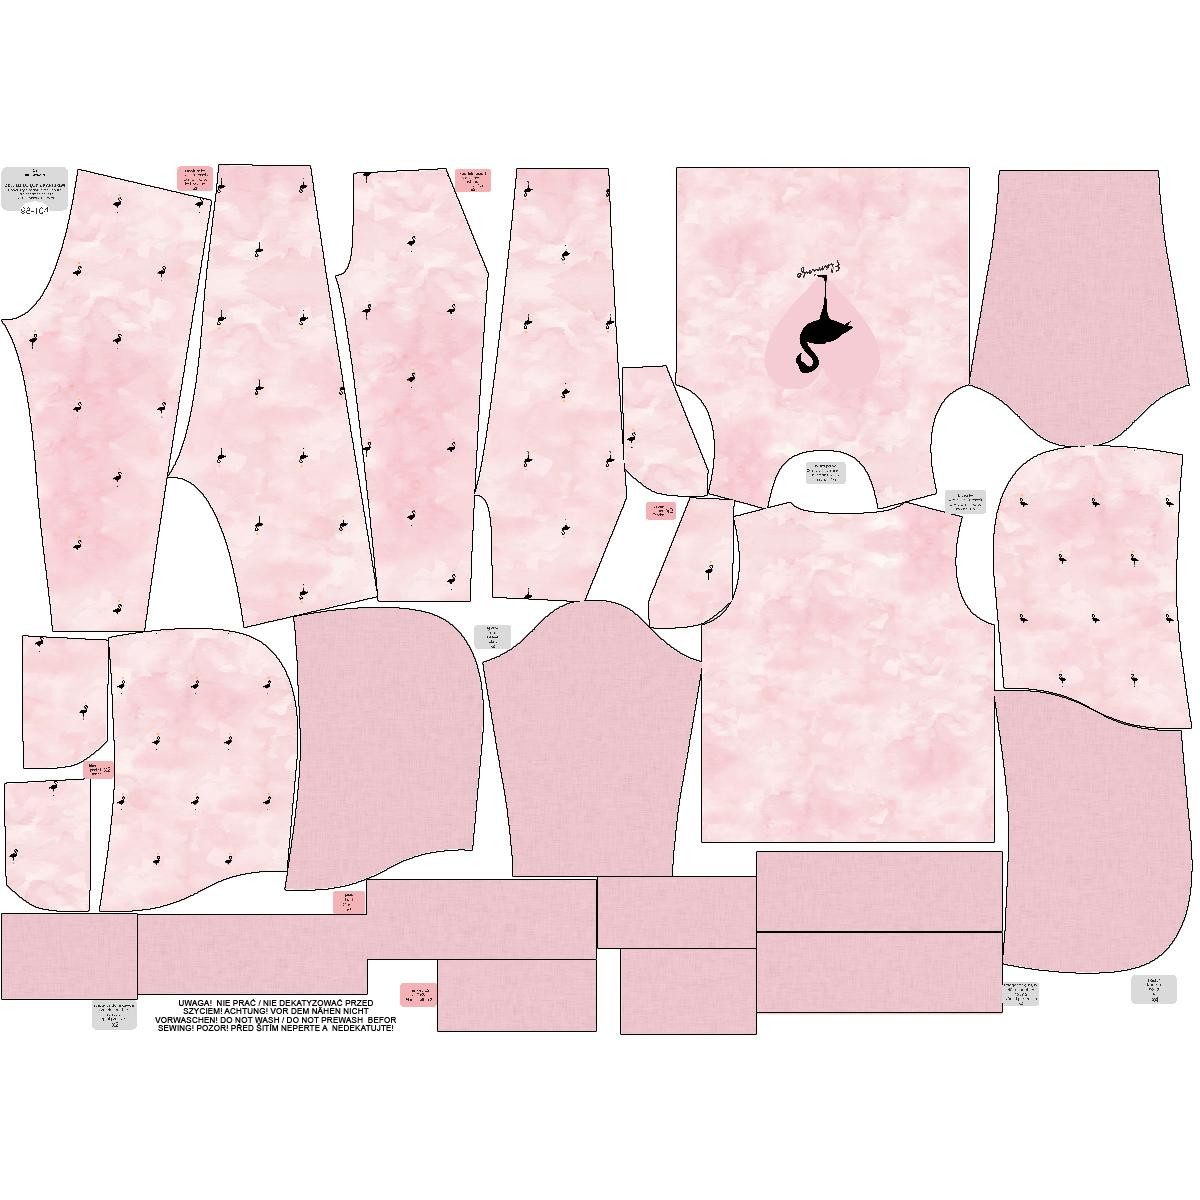 Children's tracksuit (OSLO) - FLAMINGO / CAMOUFLAGE pat. 2 (pale pink) - looped knit fabric 